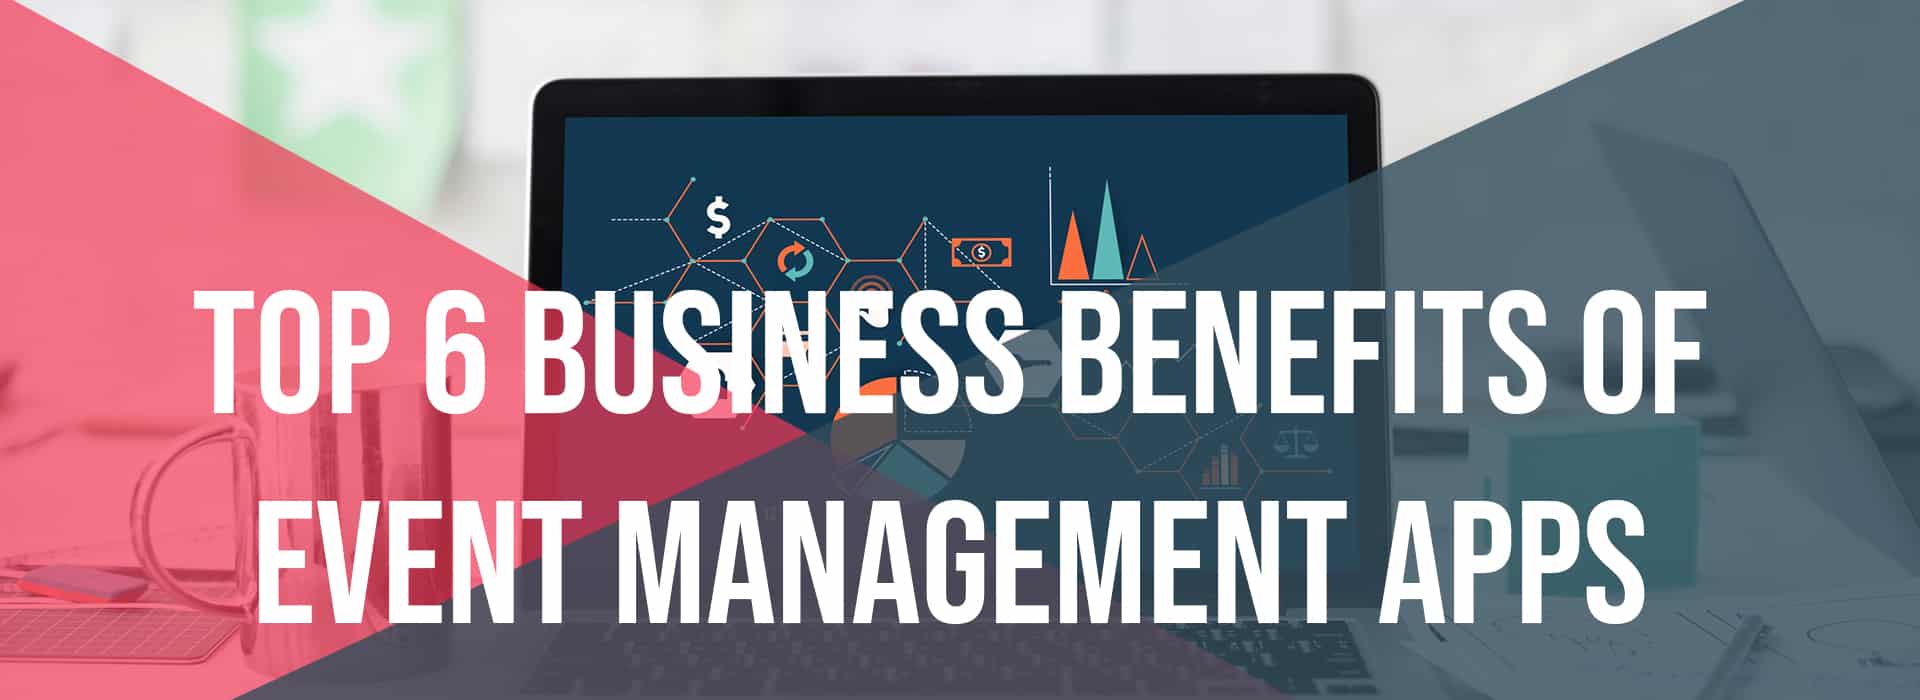 Top 6 Business Benefits of Event Management Apps